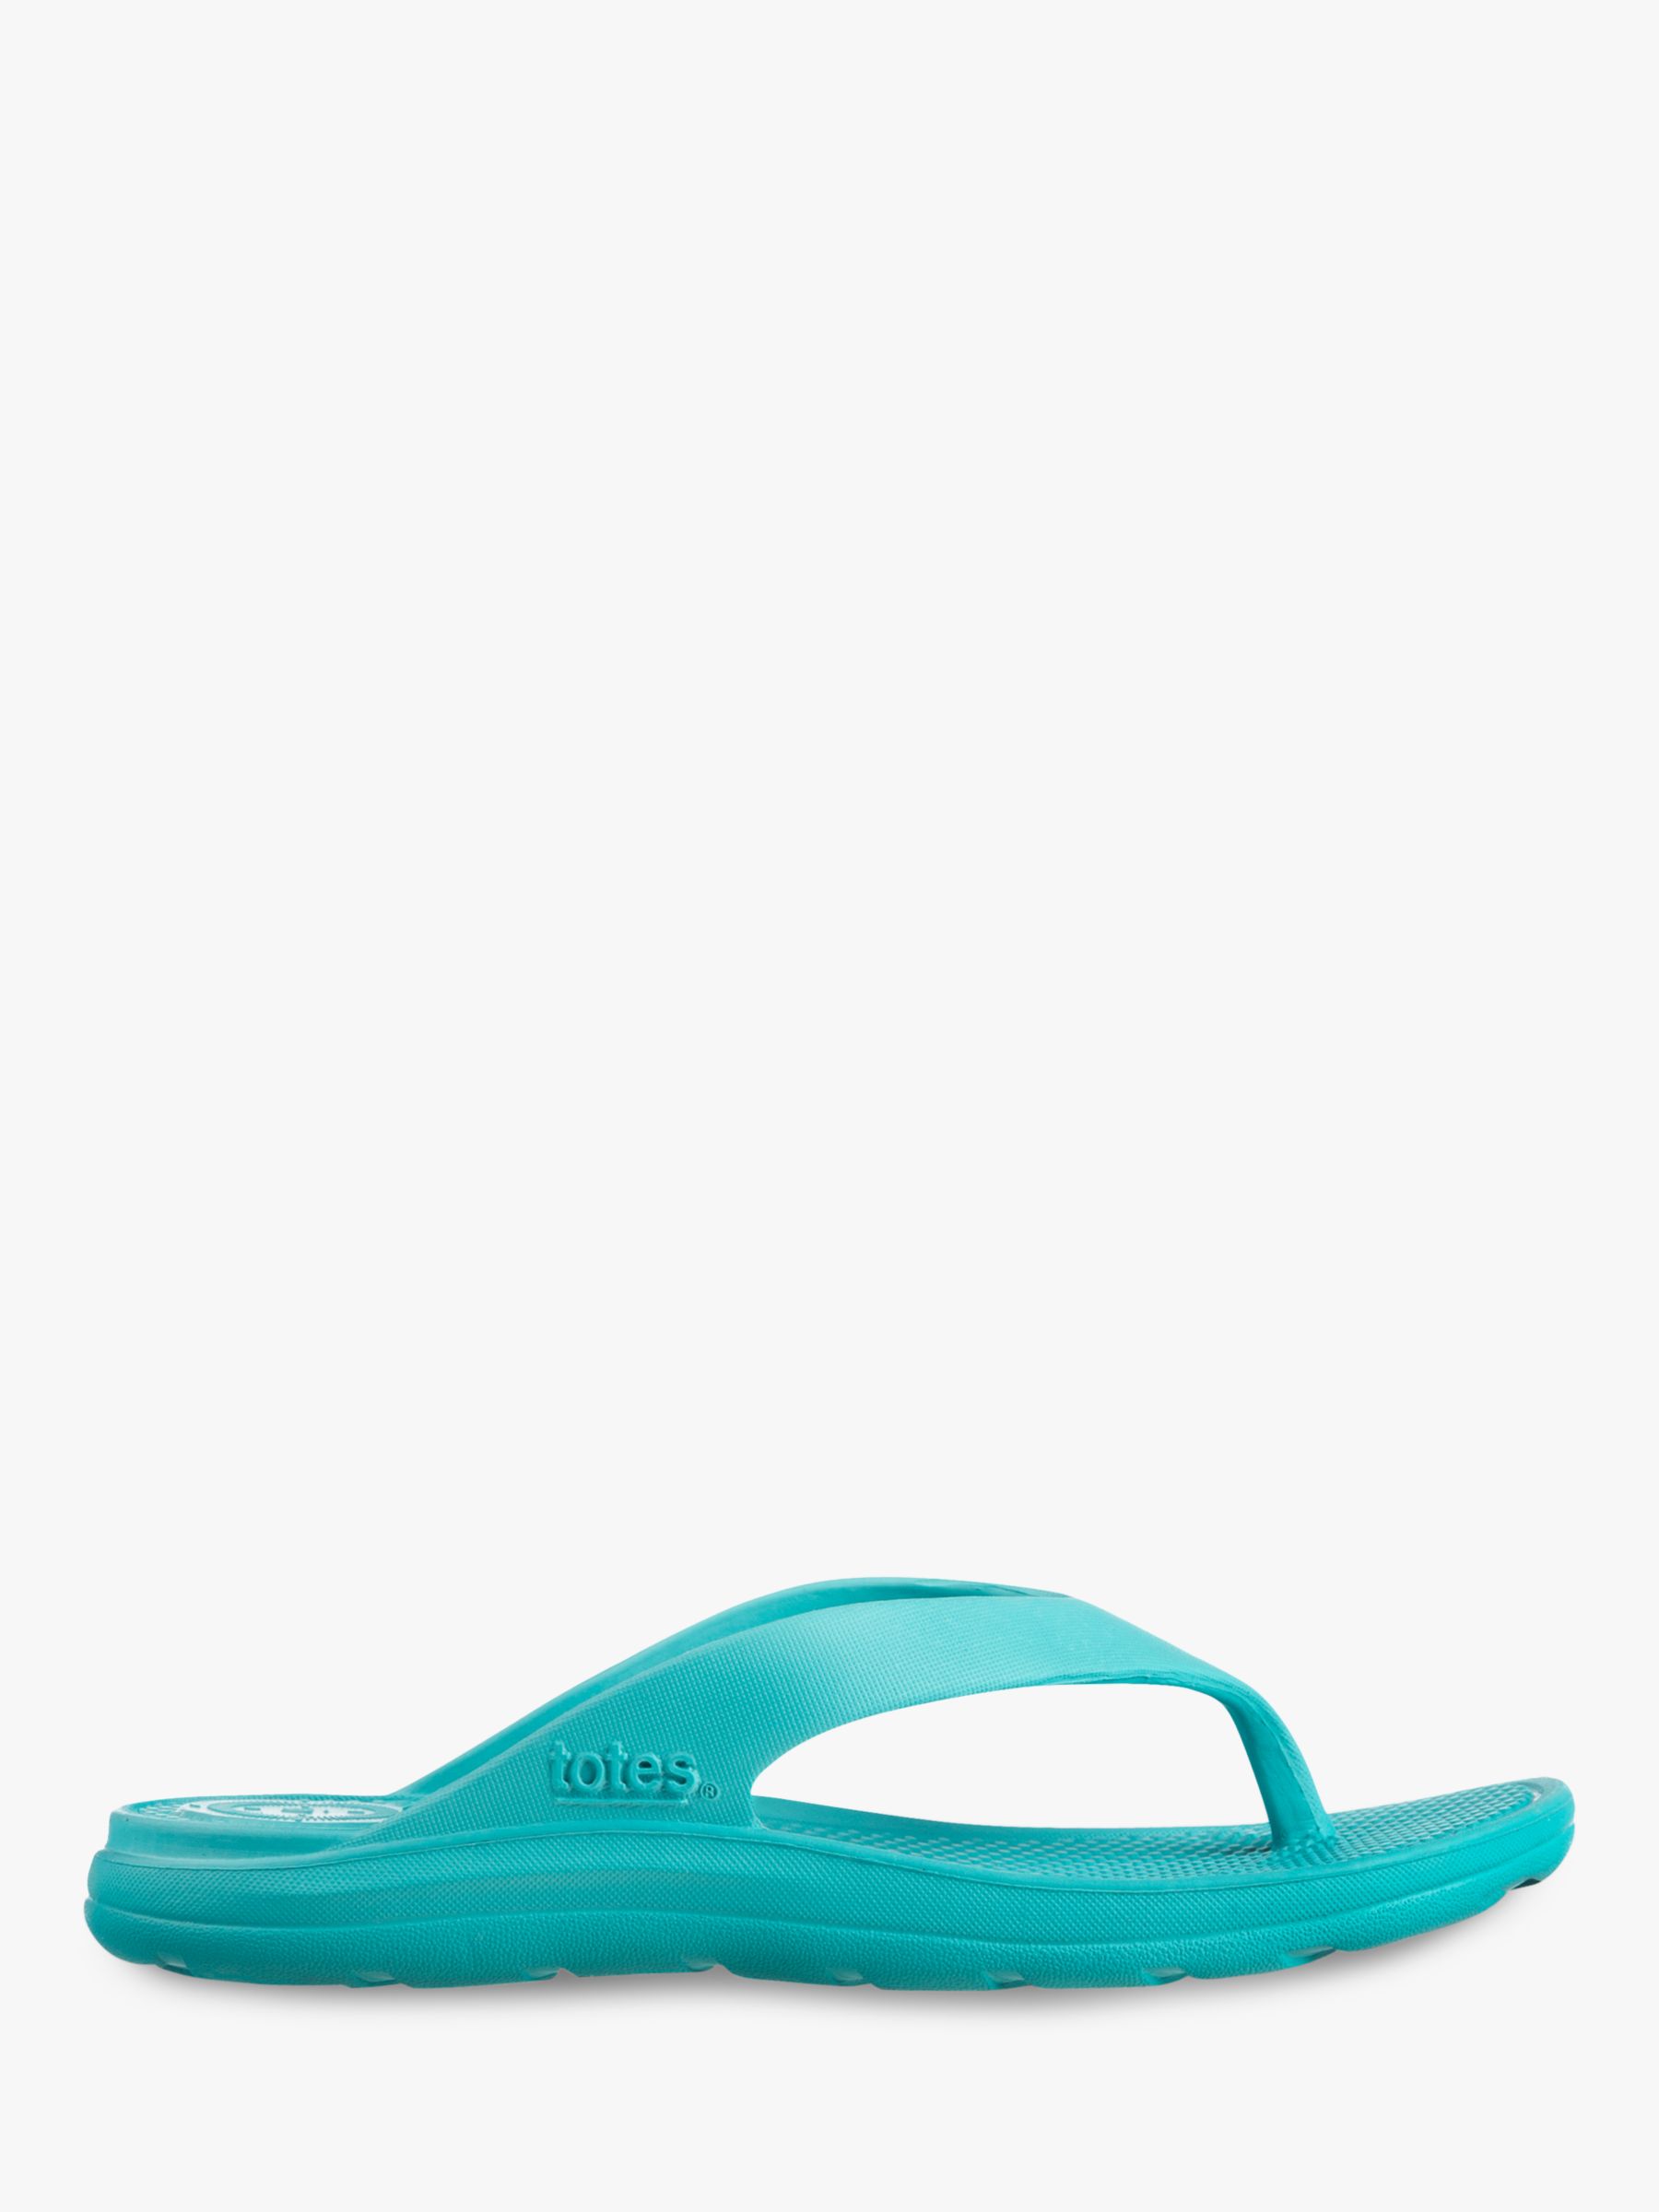 totes SOLBOUNCE Toe Post Sandals, Turquoise at John Lewis & Partners